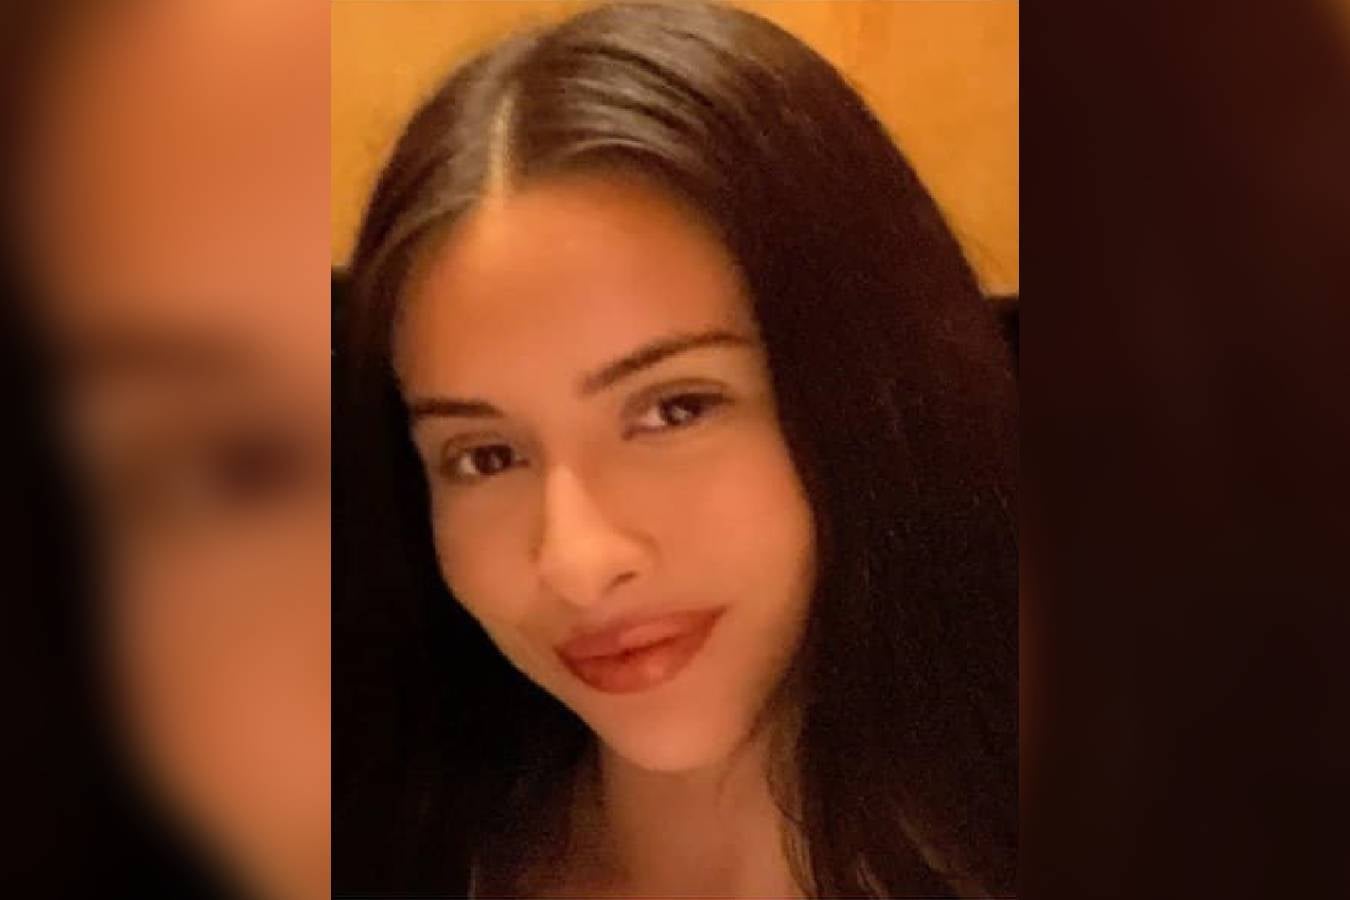 Andrea Vazquez was abducted from a park near Los Angeles